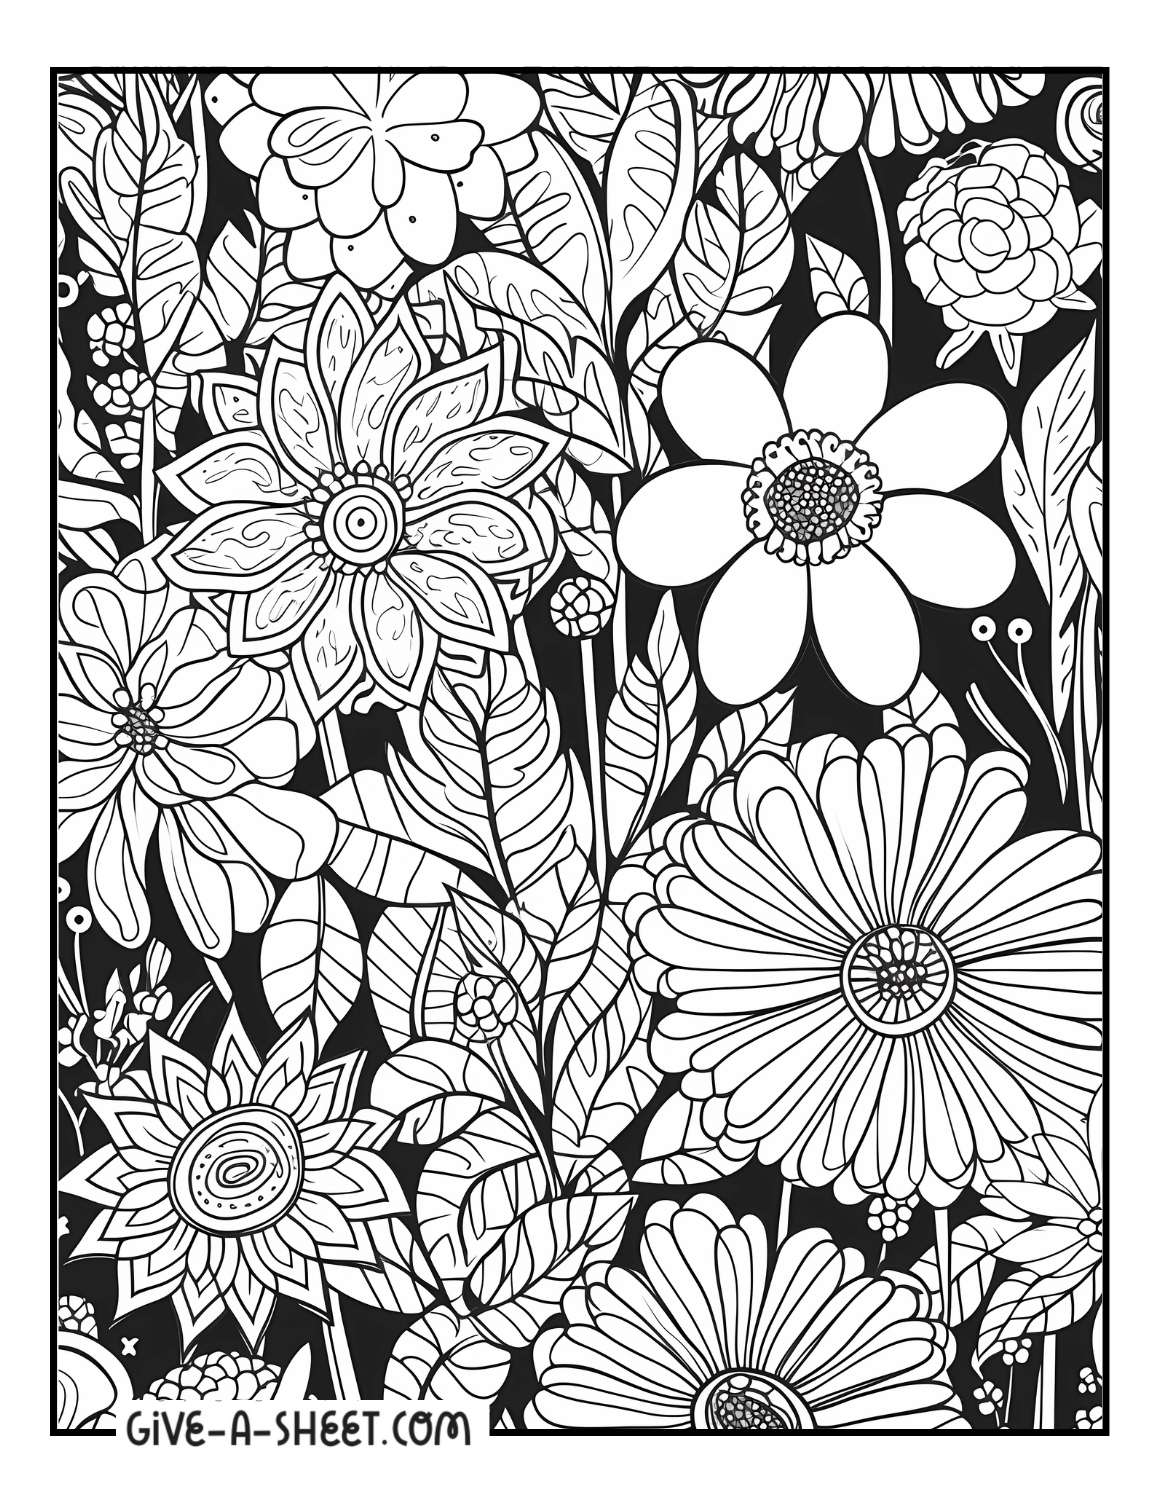 Detailed flowers coloring page for adults.